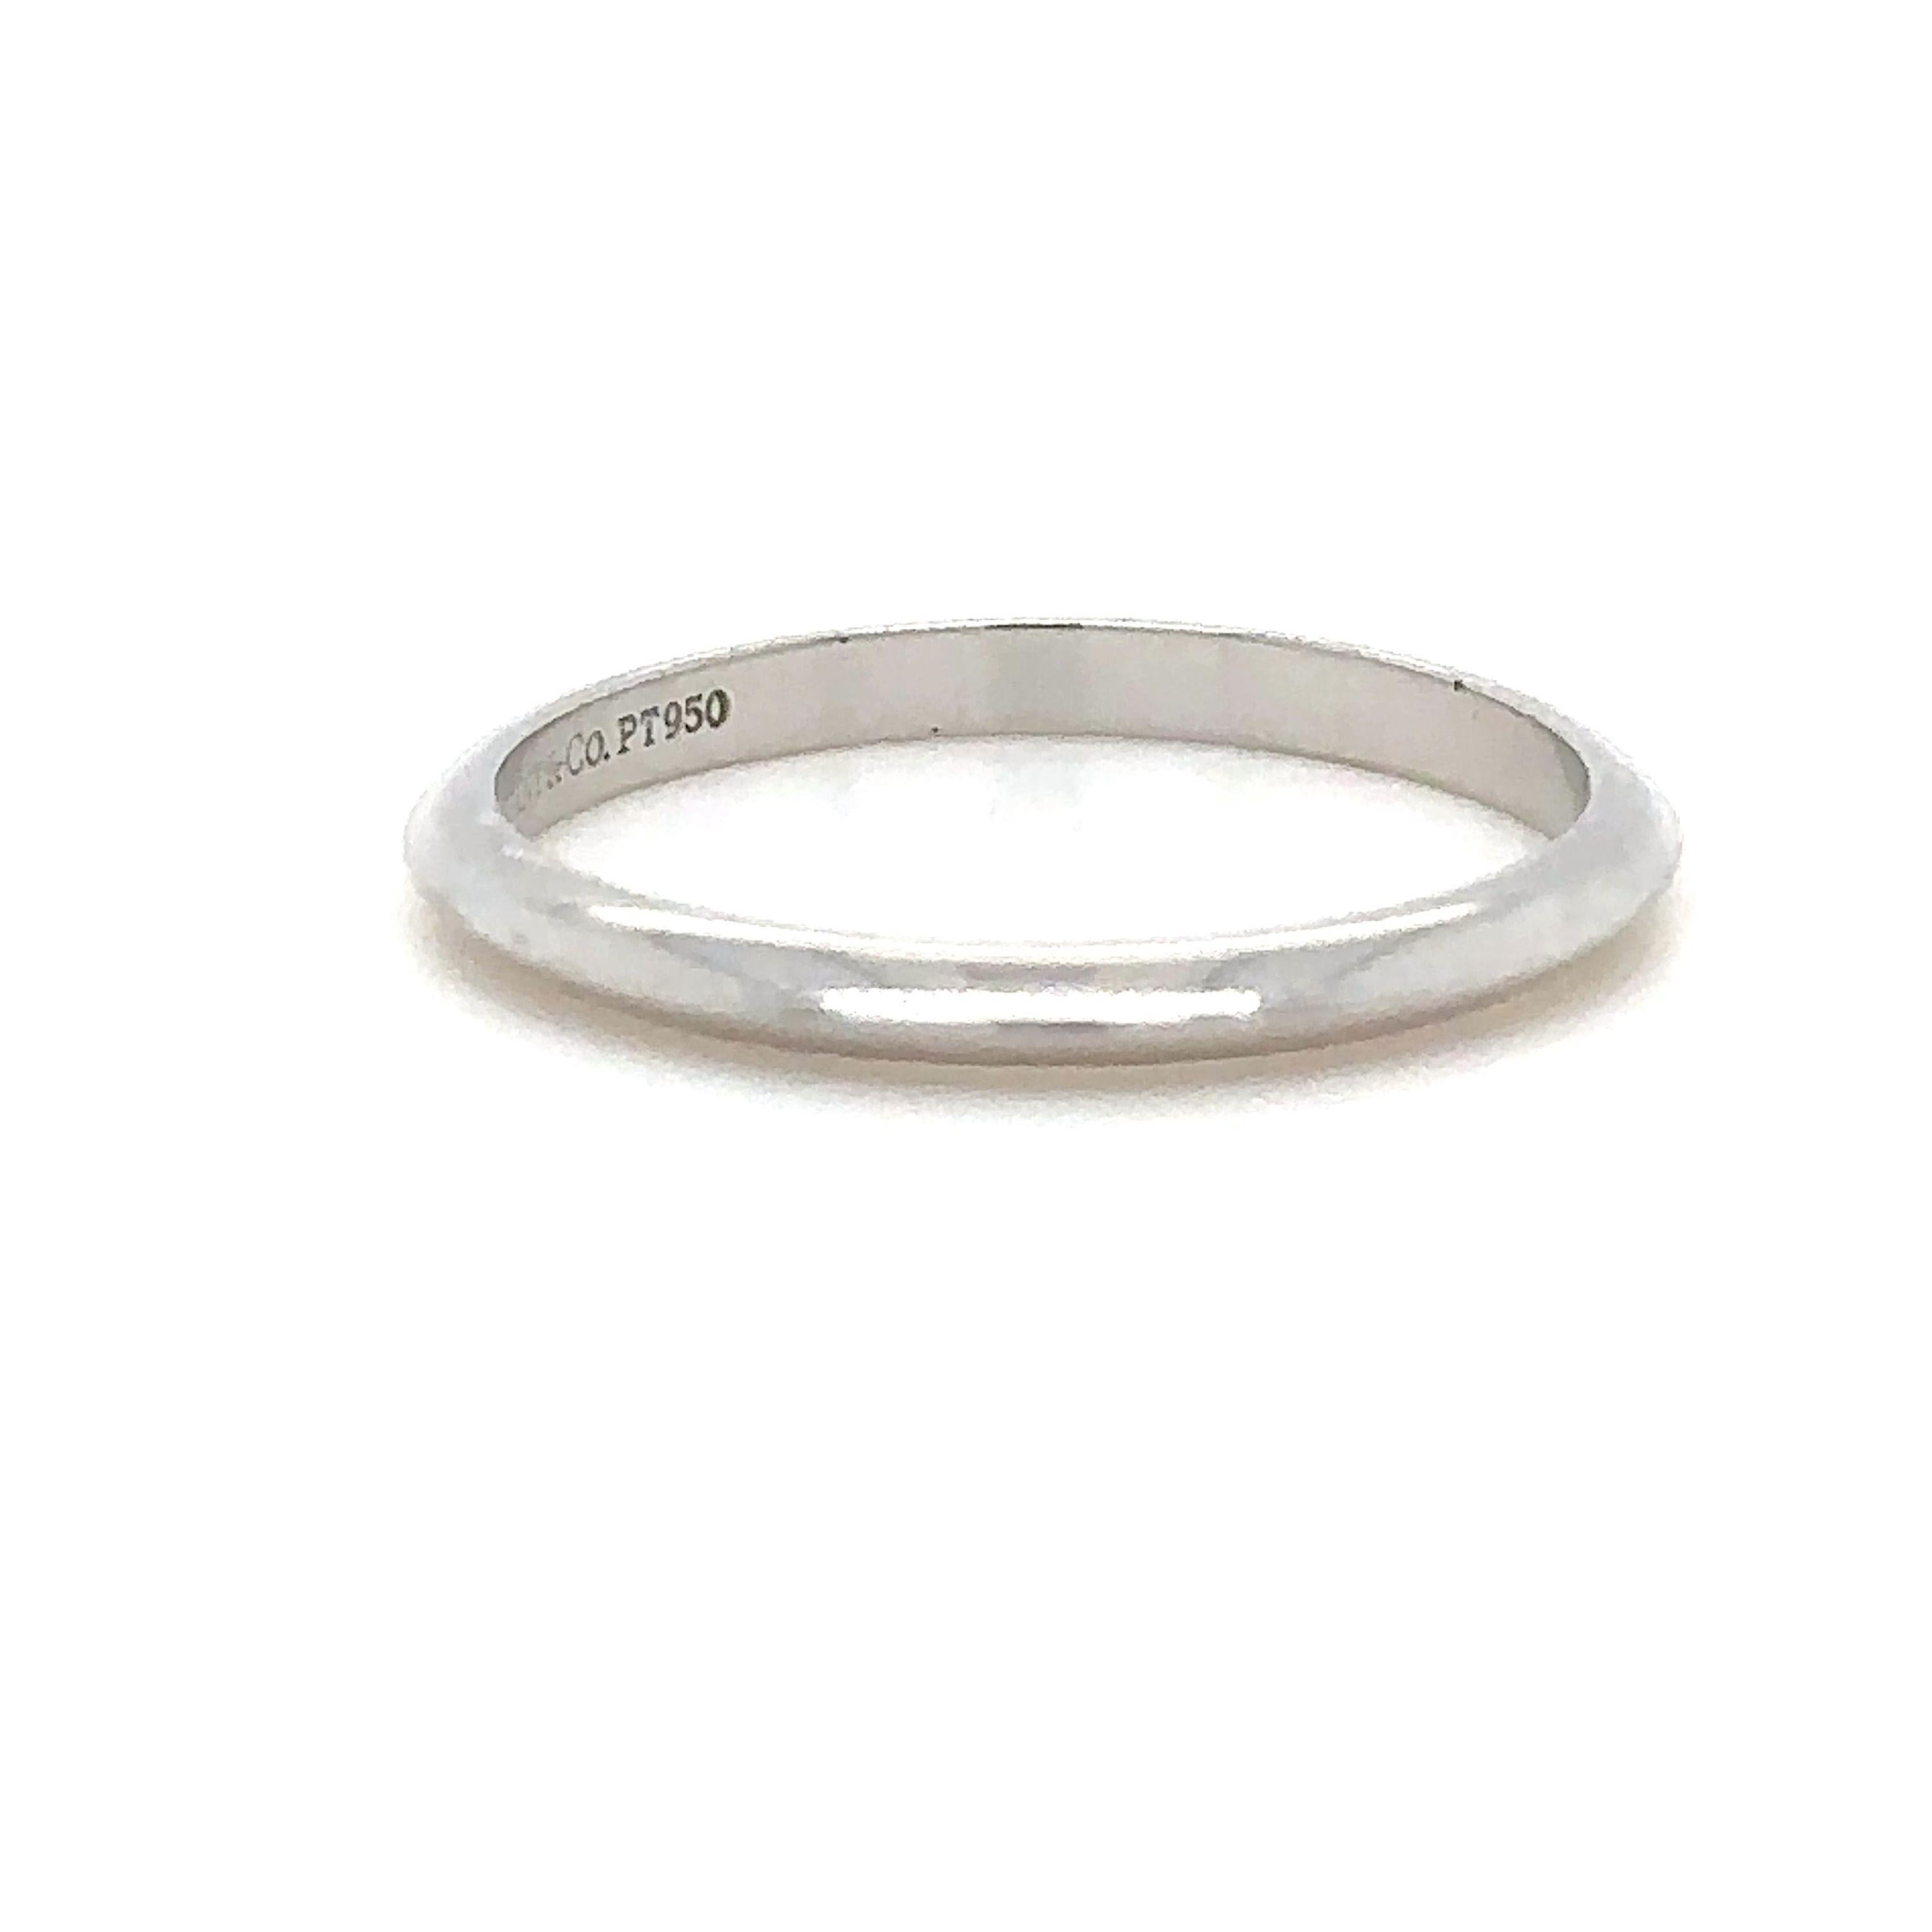 Tiffany & Co. Platinum 950 Forever Wedding Band, weighing 2.9 grams. 

Metal: 950 Platinum
Carat: N/A
Colour: N/A
Clarity:  N/A
Cut: N/A
Weight: 2.9 grams
Engravings/Markings: Stamped: Tiffany & Co. PT950.

Size/Measurement: Ring Size P

Current